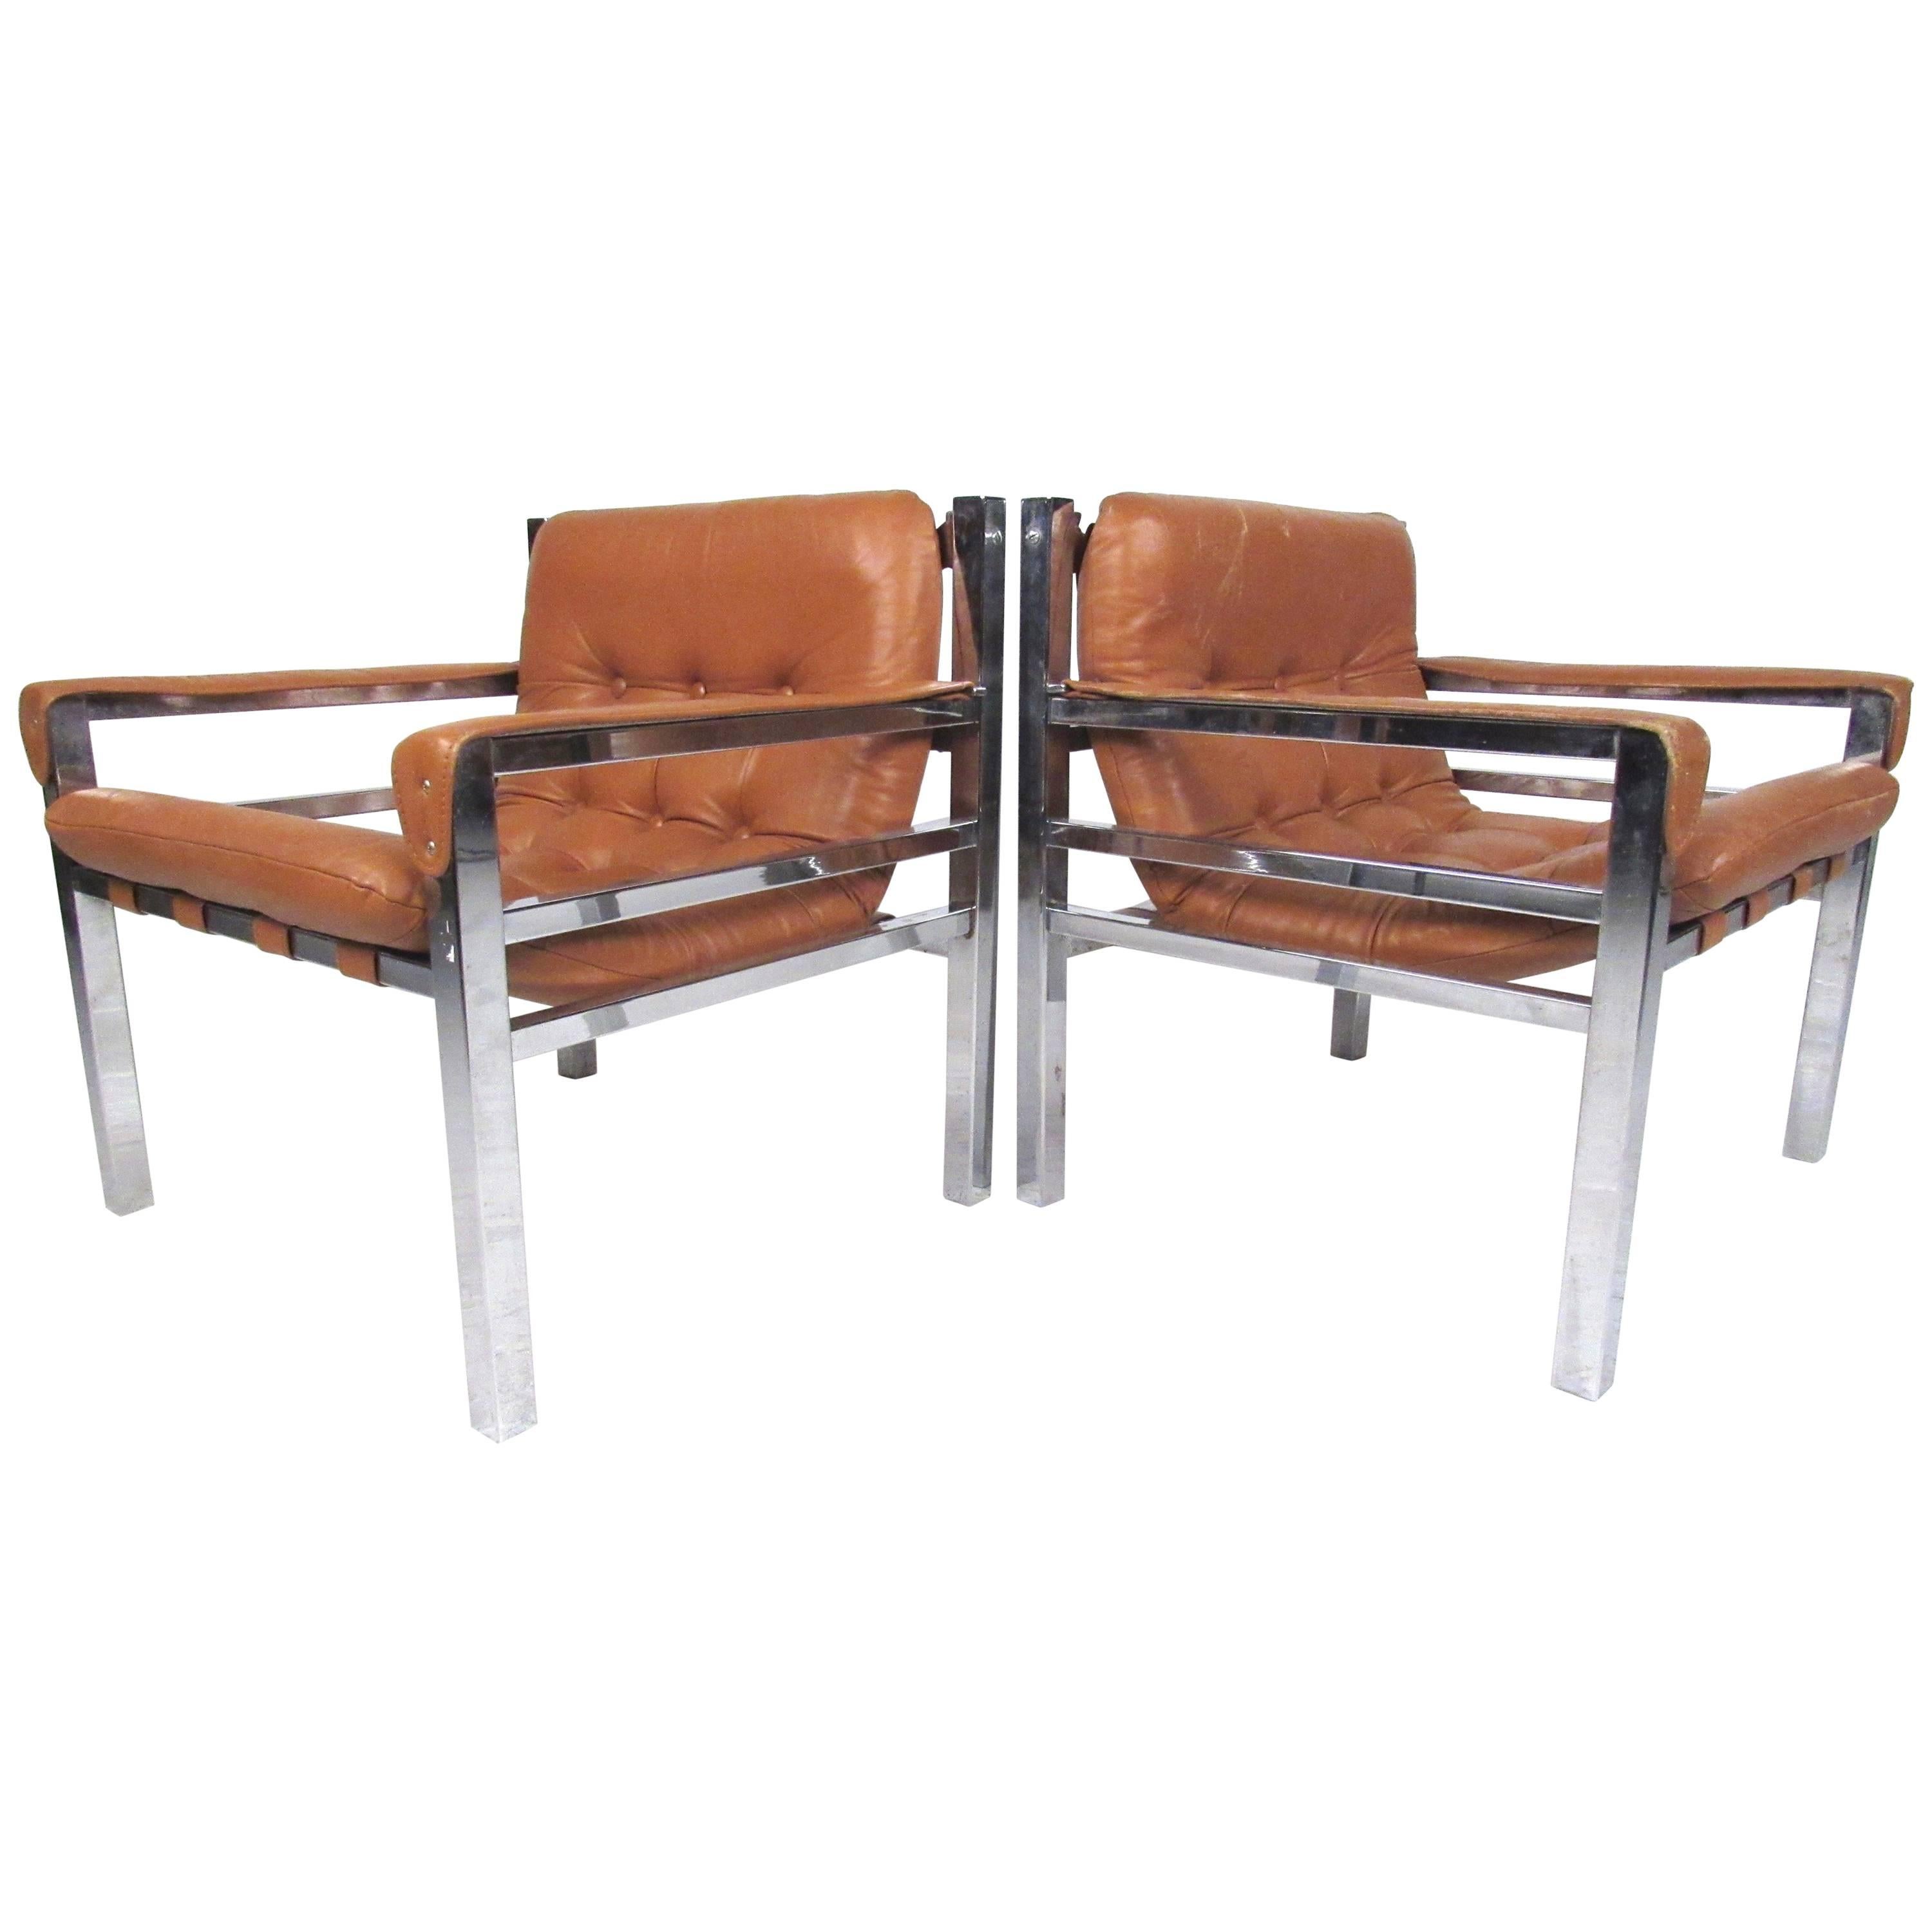 Pair of Mid-Century Modern Leather and Chrome Lounge Chairs